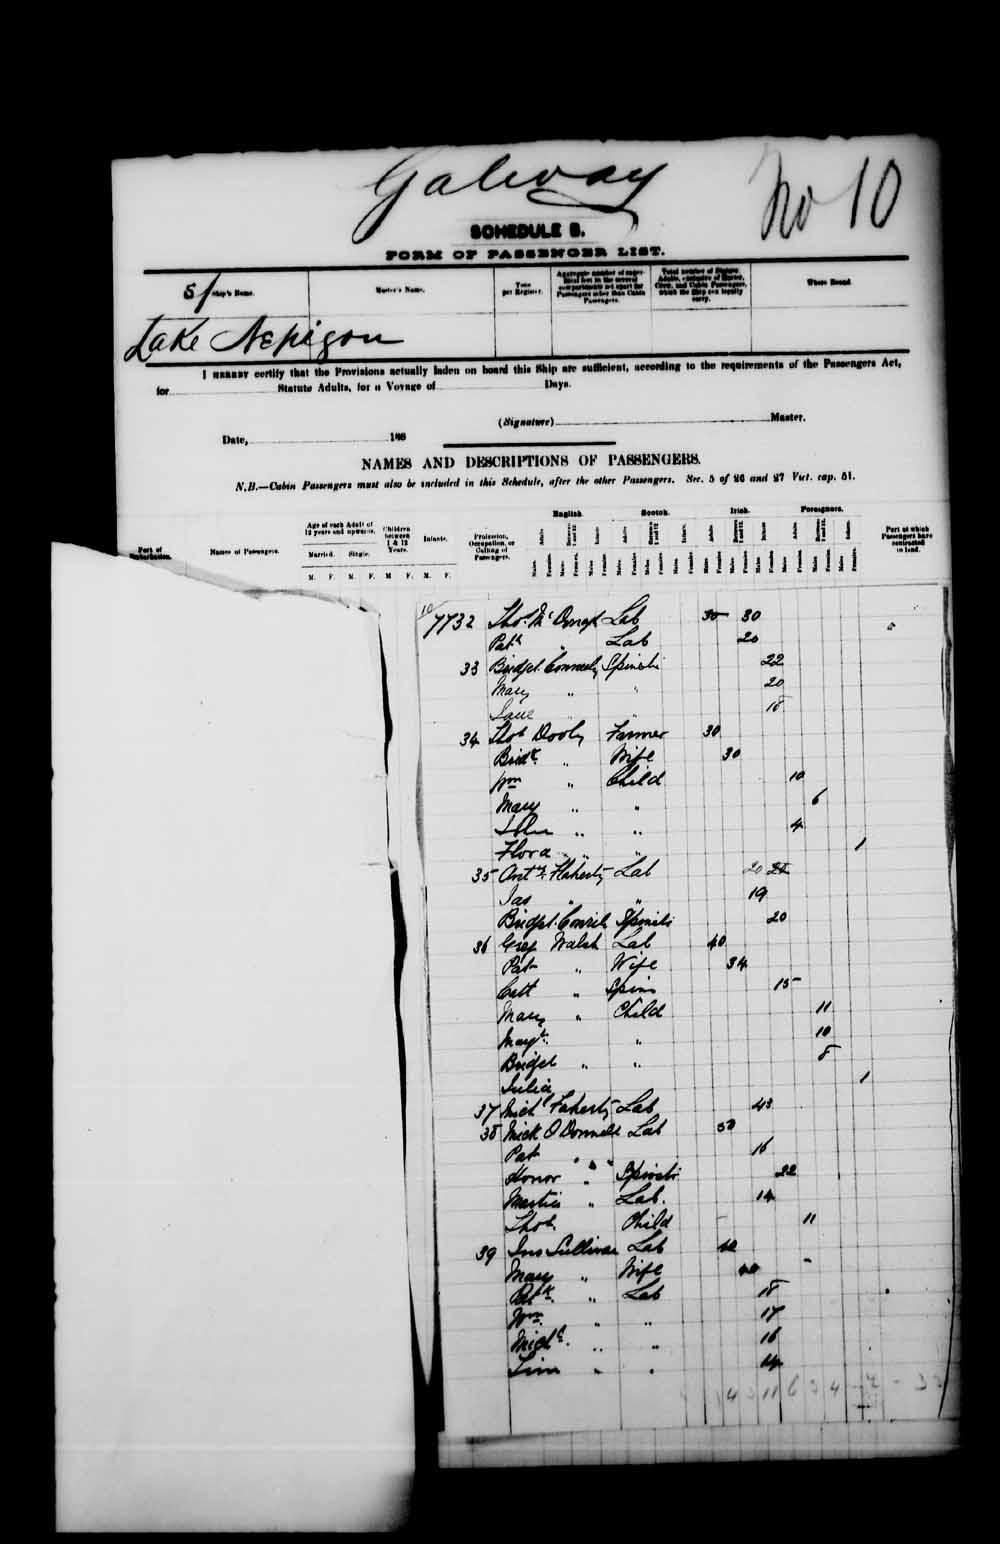 Digitized page of Passenger Lists for Image No.: e003541466